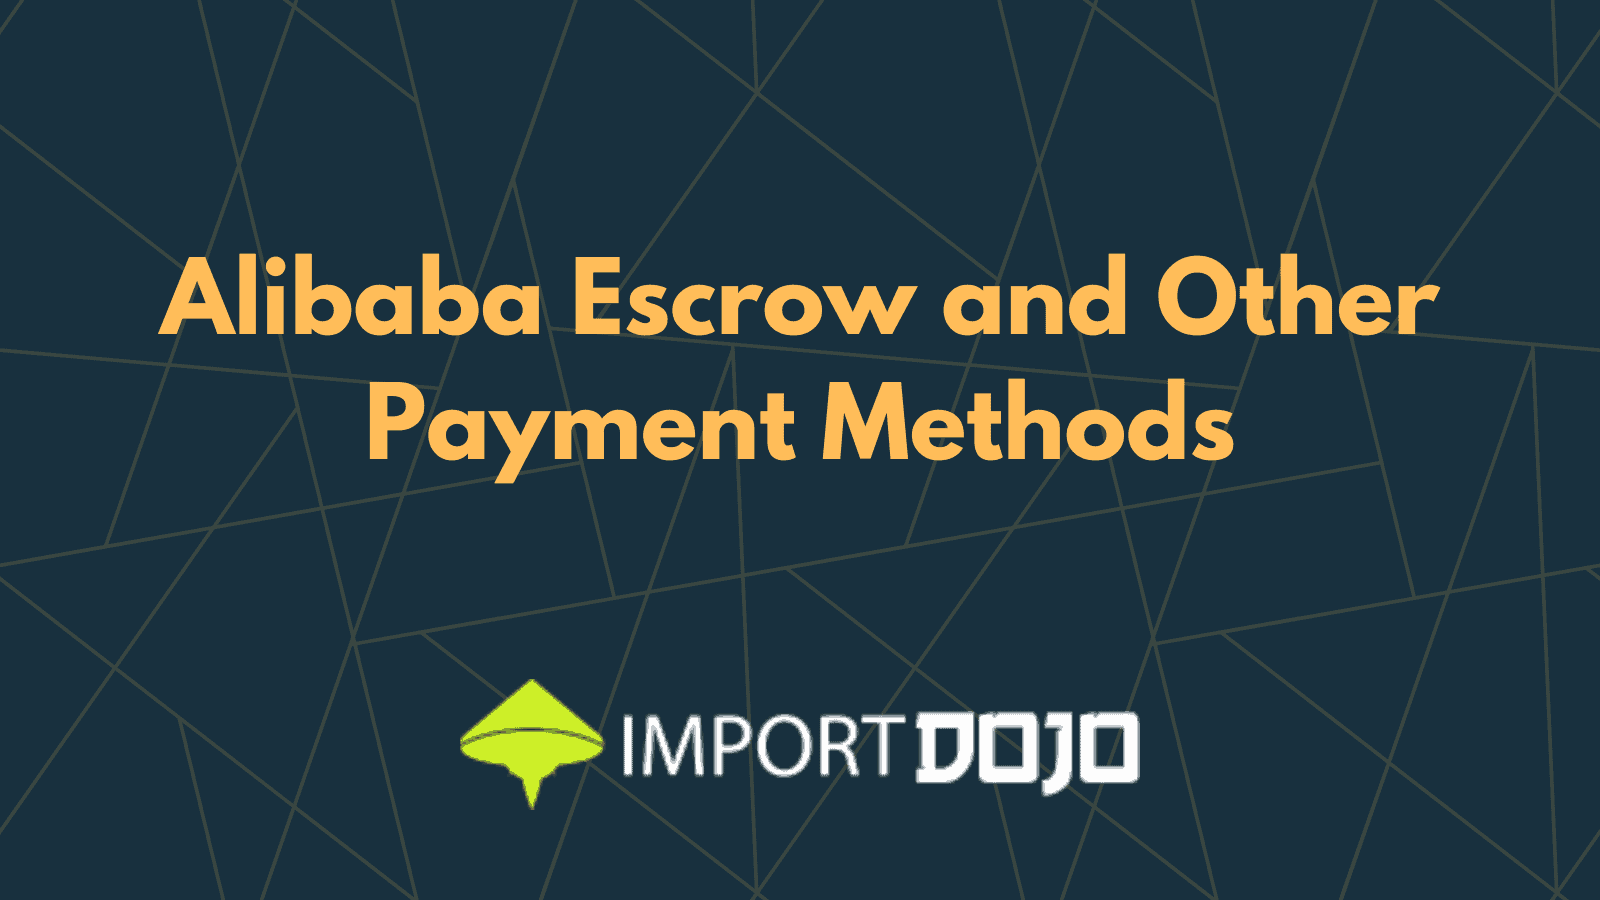 Alibaba Escrow and Other Payment Methods